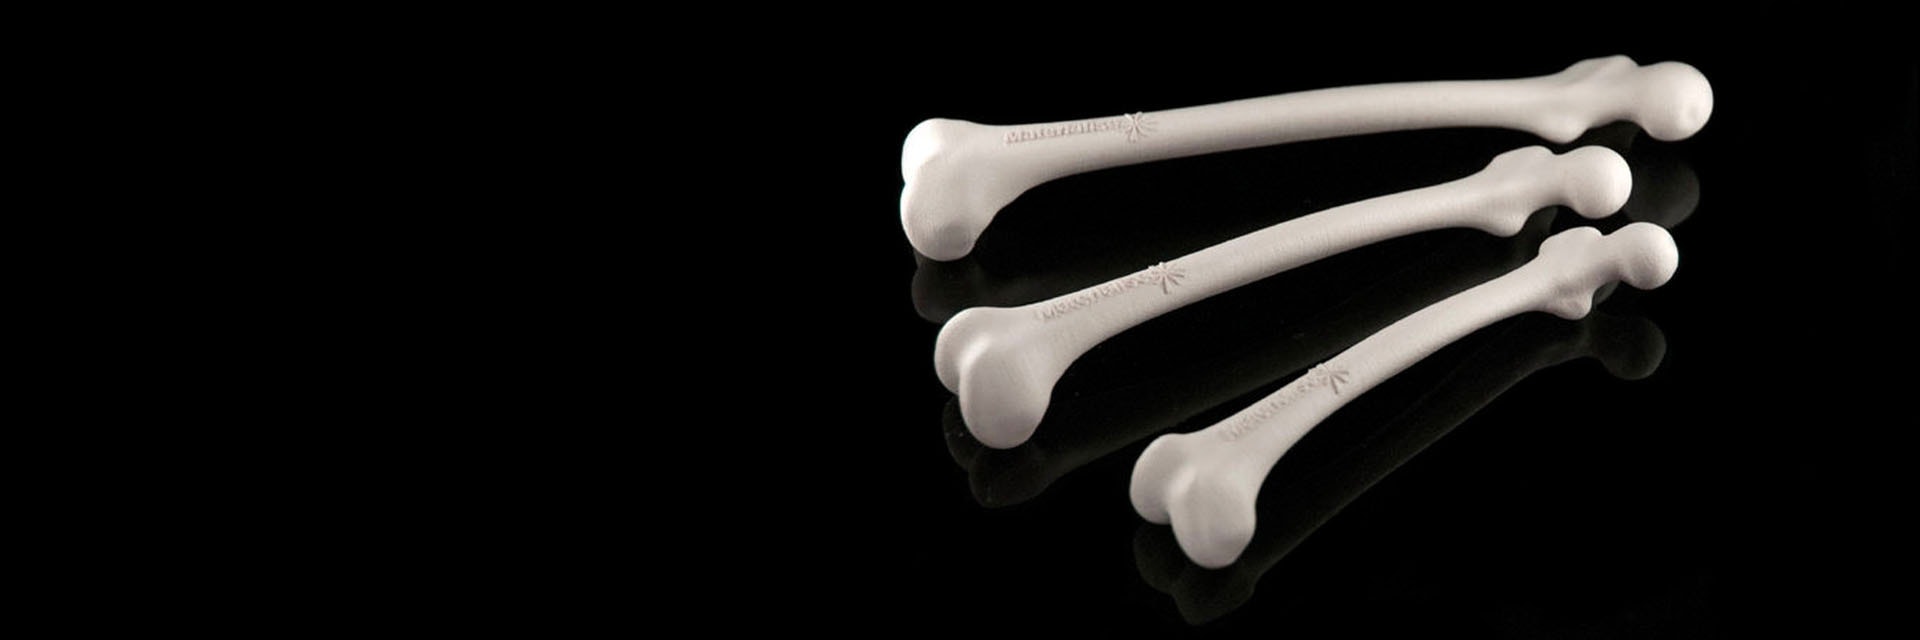 Three 3D-printed bone models with the Materialise logo on them